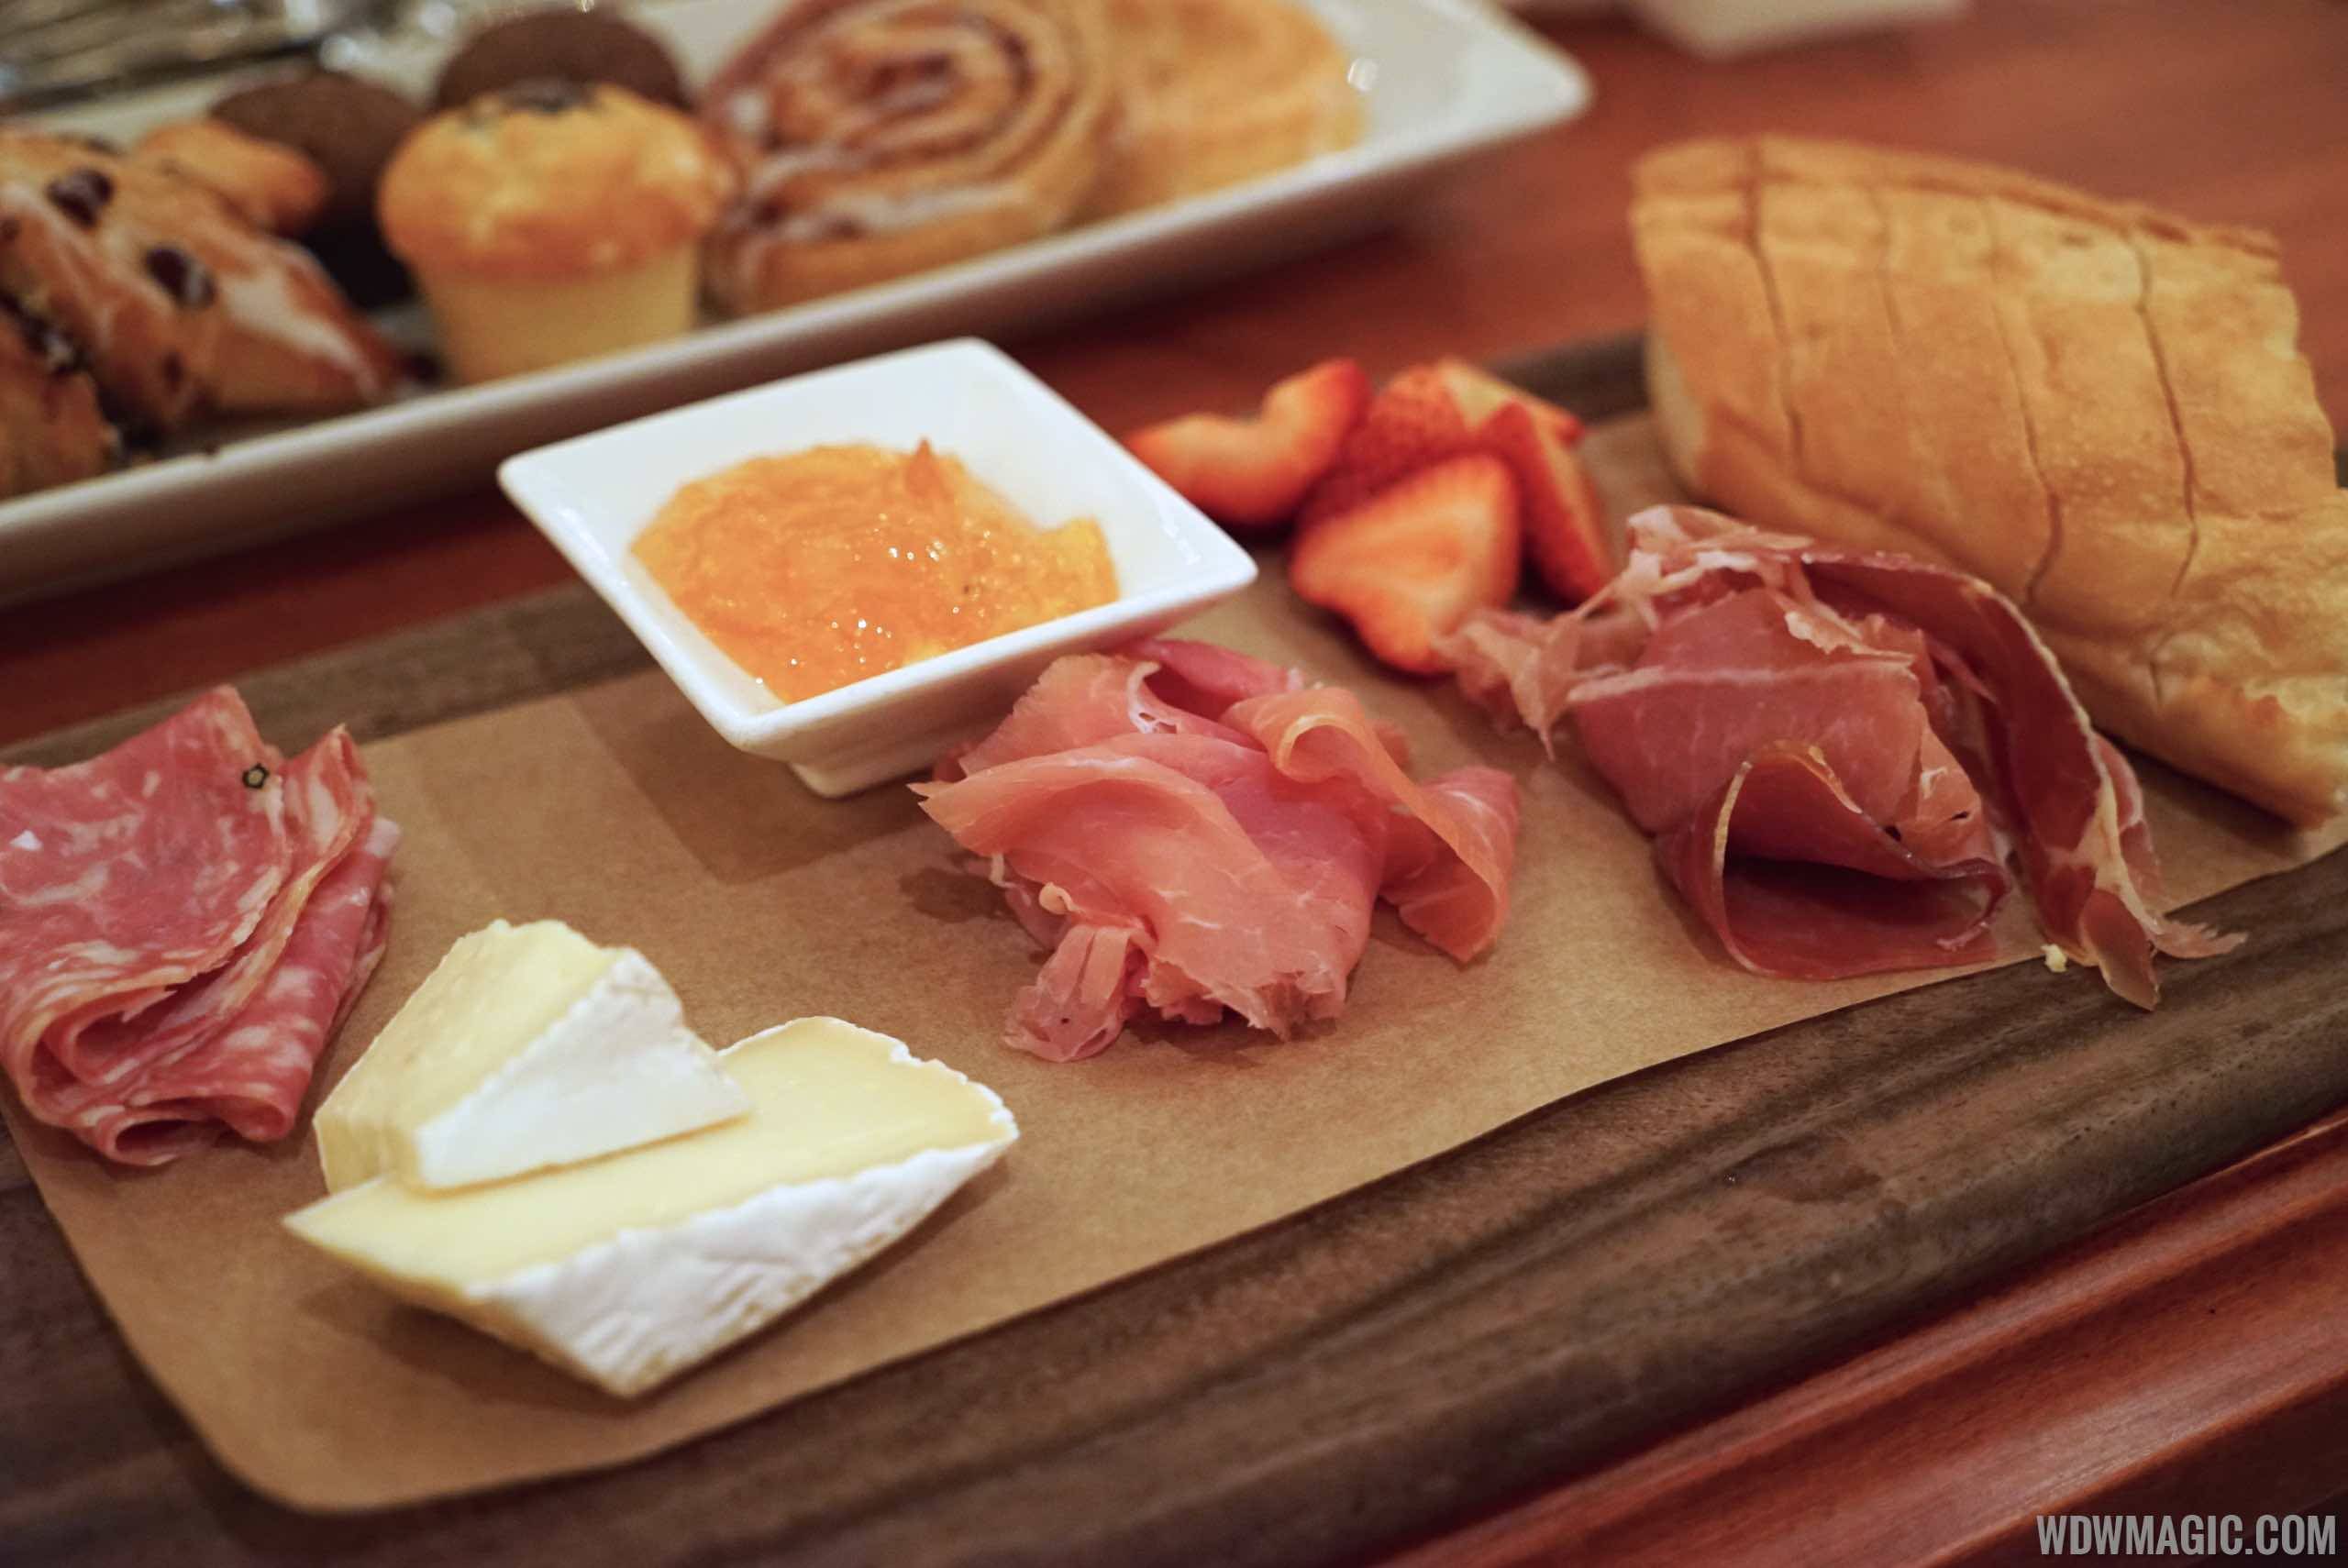 Be Our Guest Restaurant Breakfast - Assorted Meats and Cheese